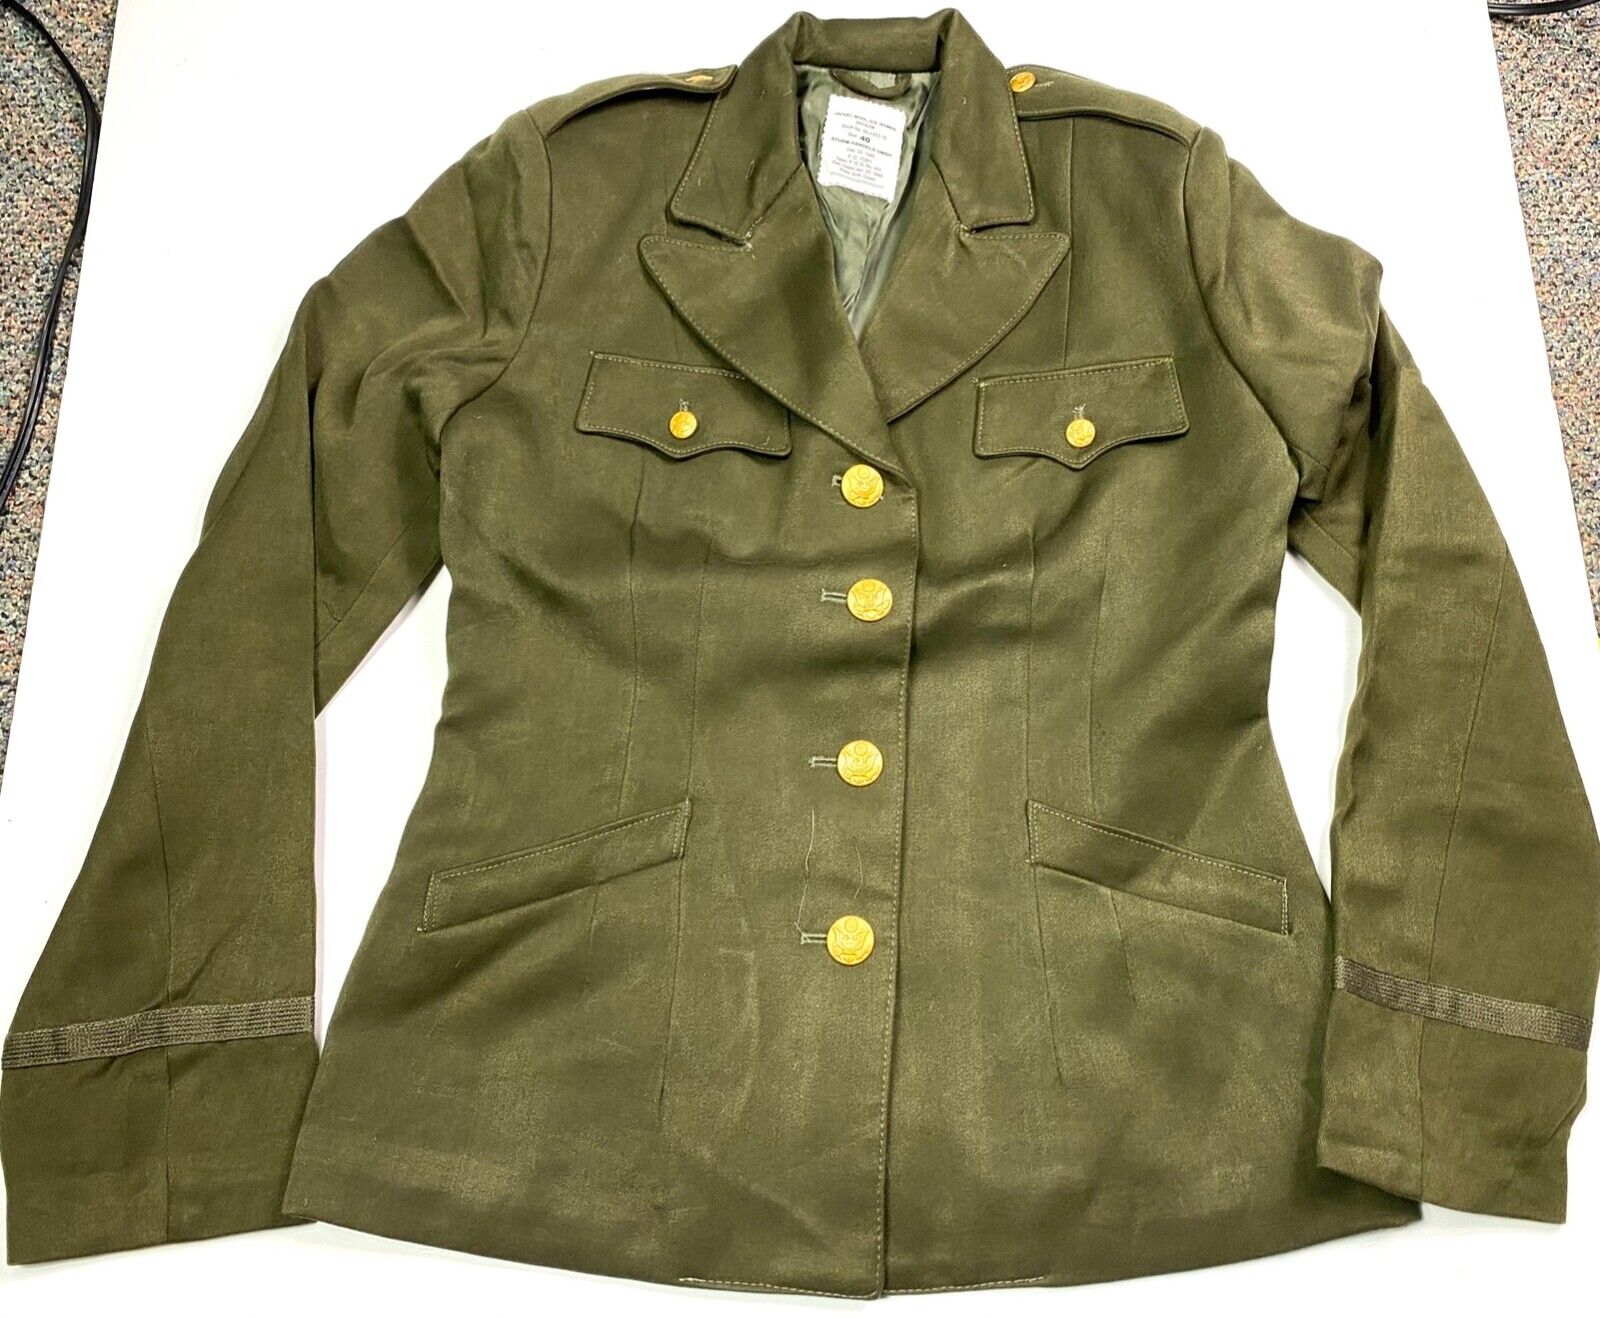 WWII US ARMY WOMEN'S FEMALE OFFICER PX CLASS A JACKET TUNIC-MEDIUM